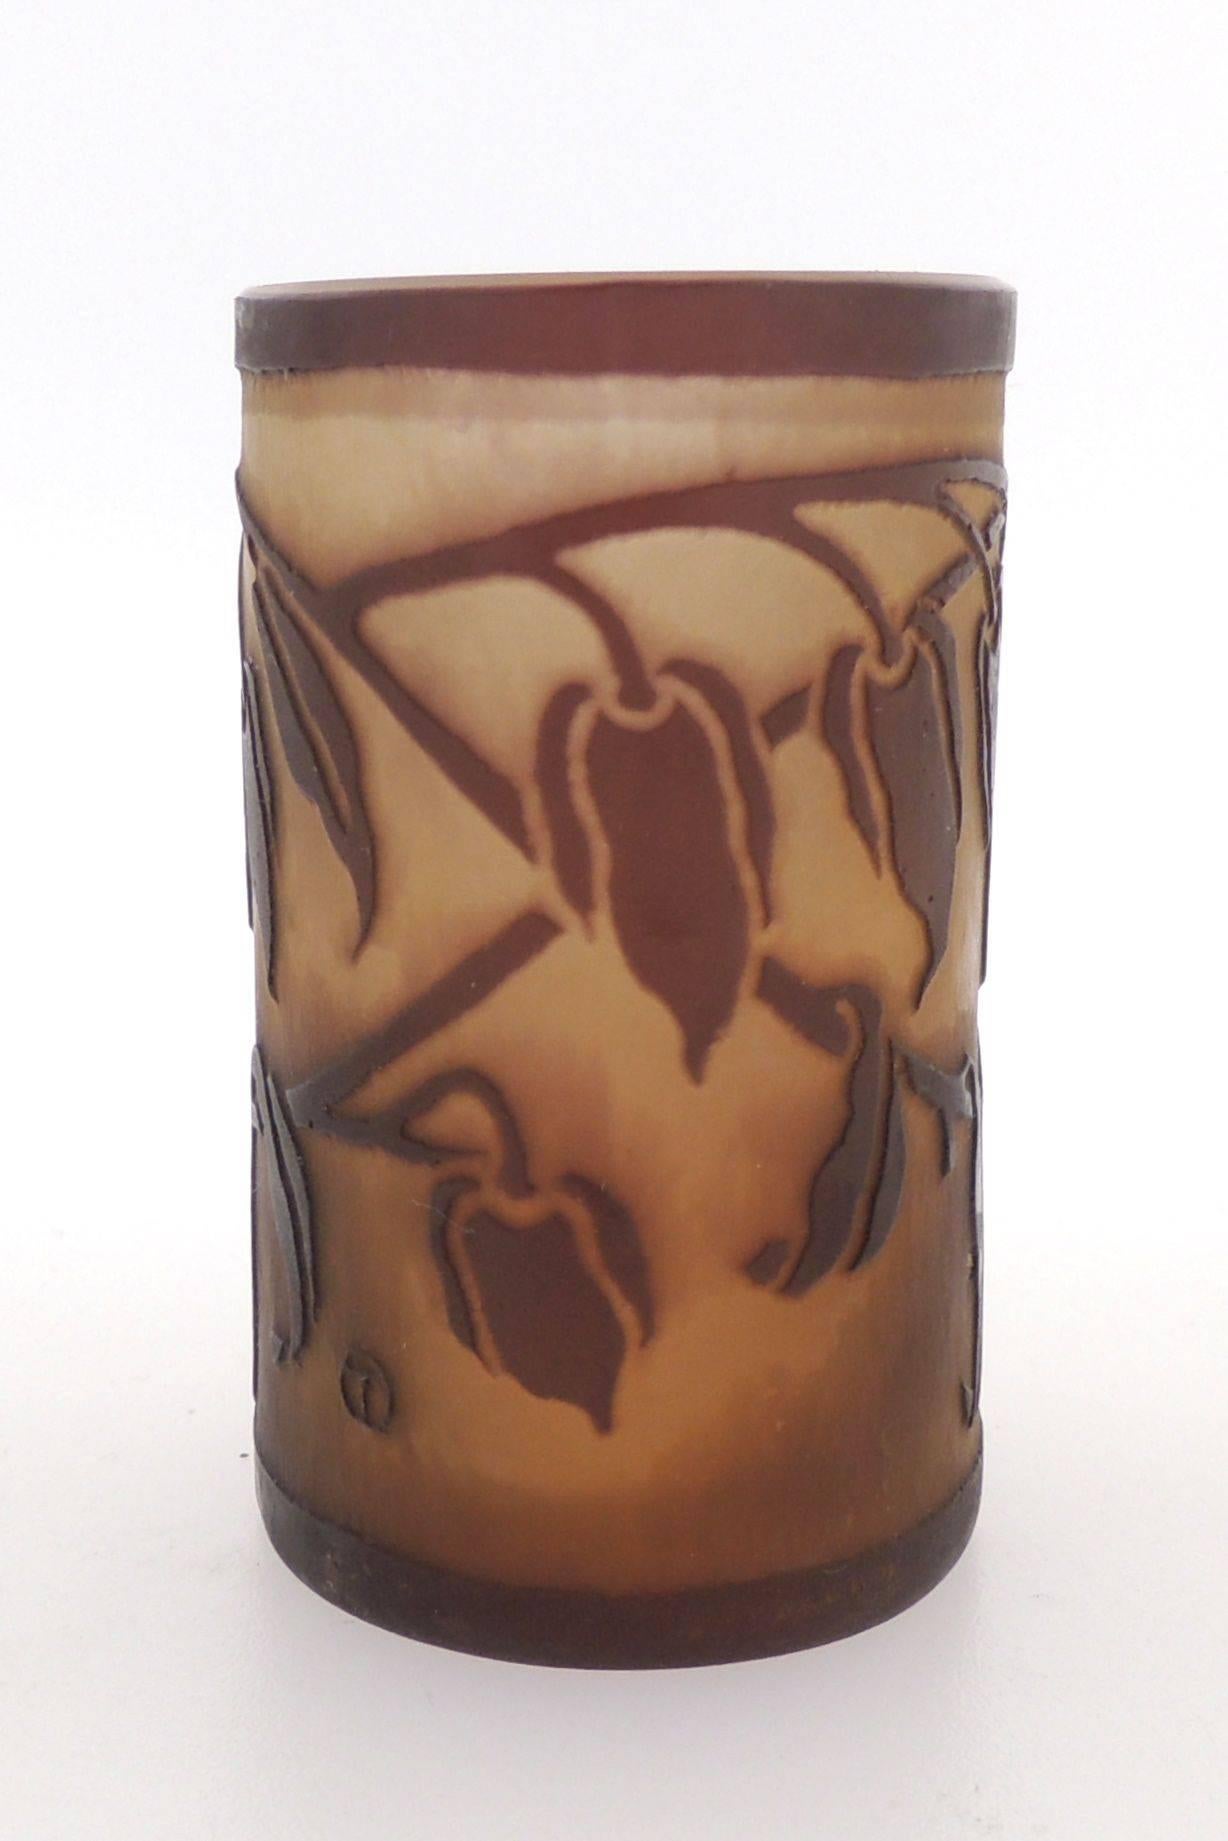 Designed by Otto Tauschek for Karl Ludwig Moser, this small beaker shaped glass vase is deeply etched with stylized twigs with flowers and leaves. It has strong Jugendstil form. The front bears etched OT in circle mark for Otto Tauschek and LKM in